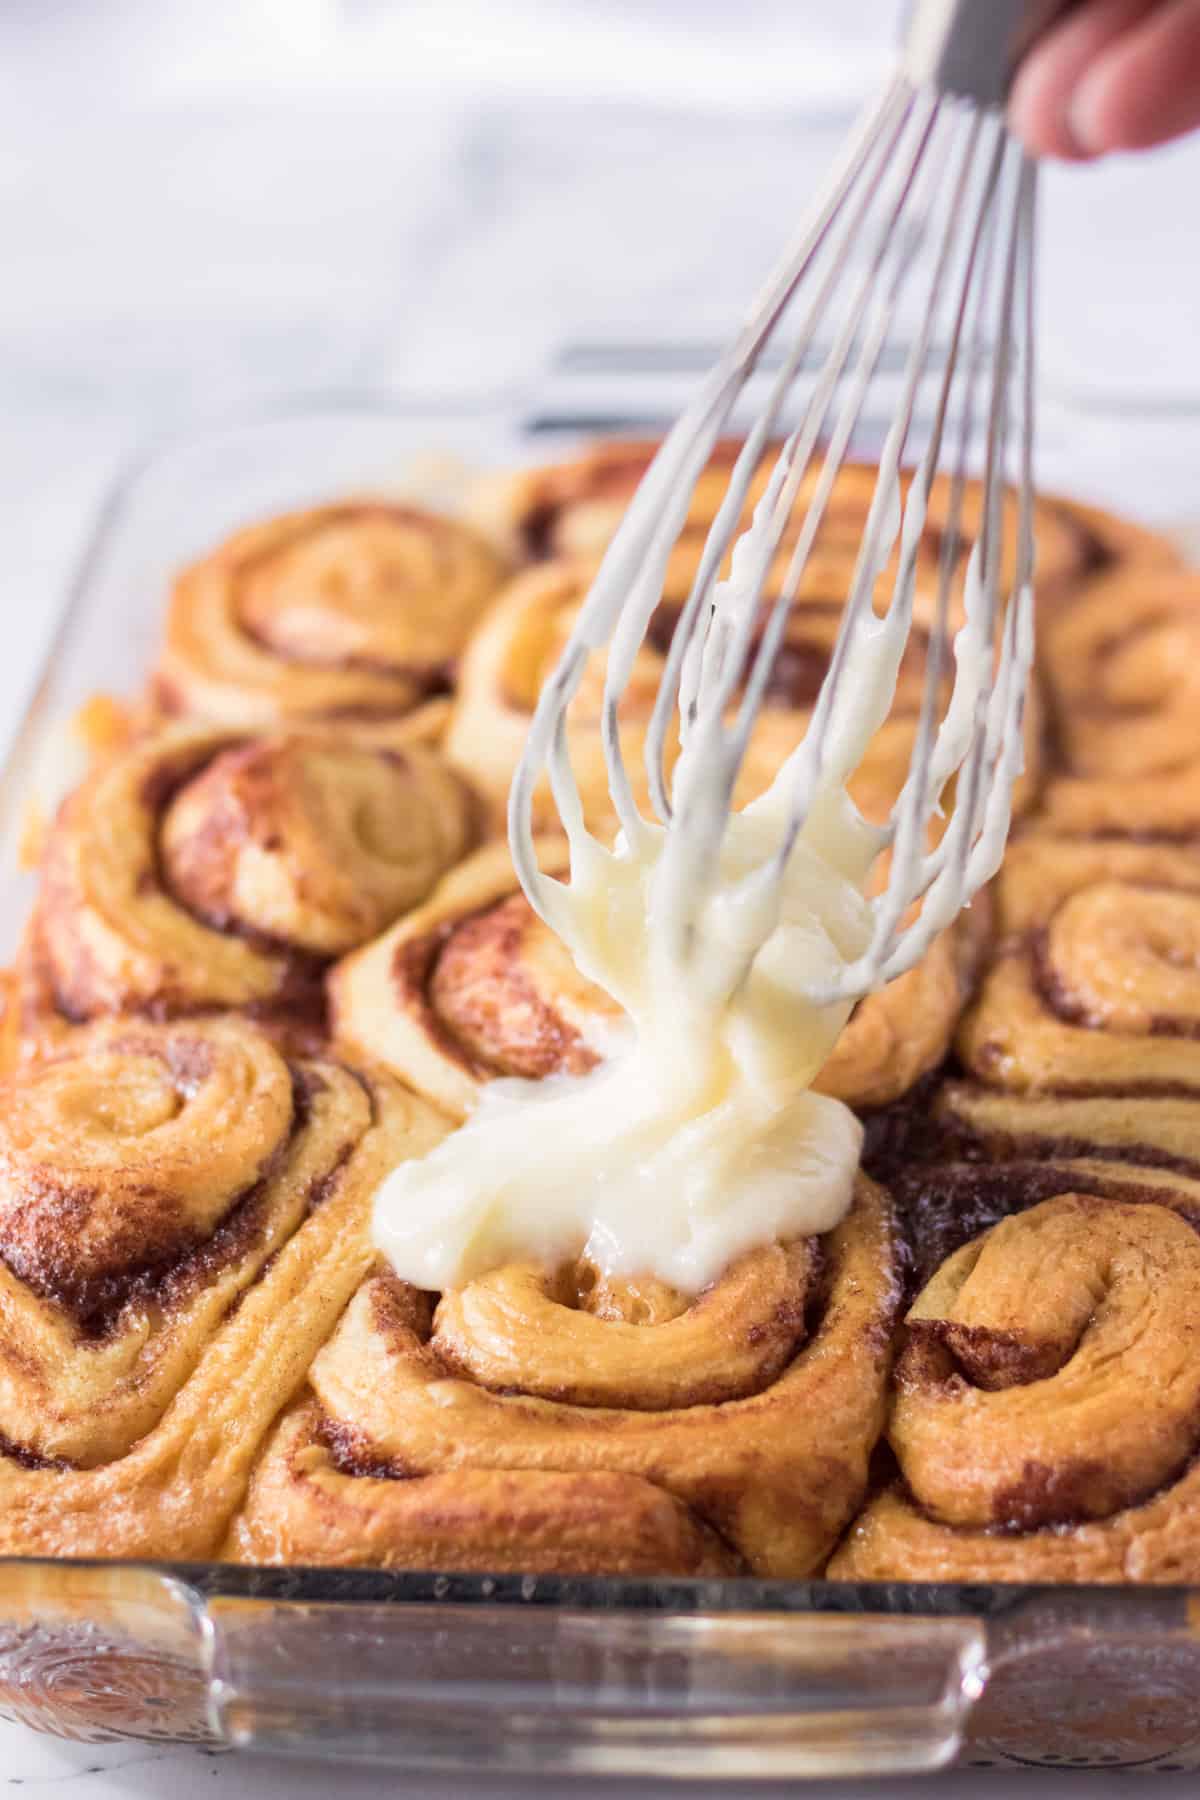 Cream cheese icing being spread on the baked cinnamon rolls.